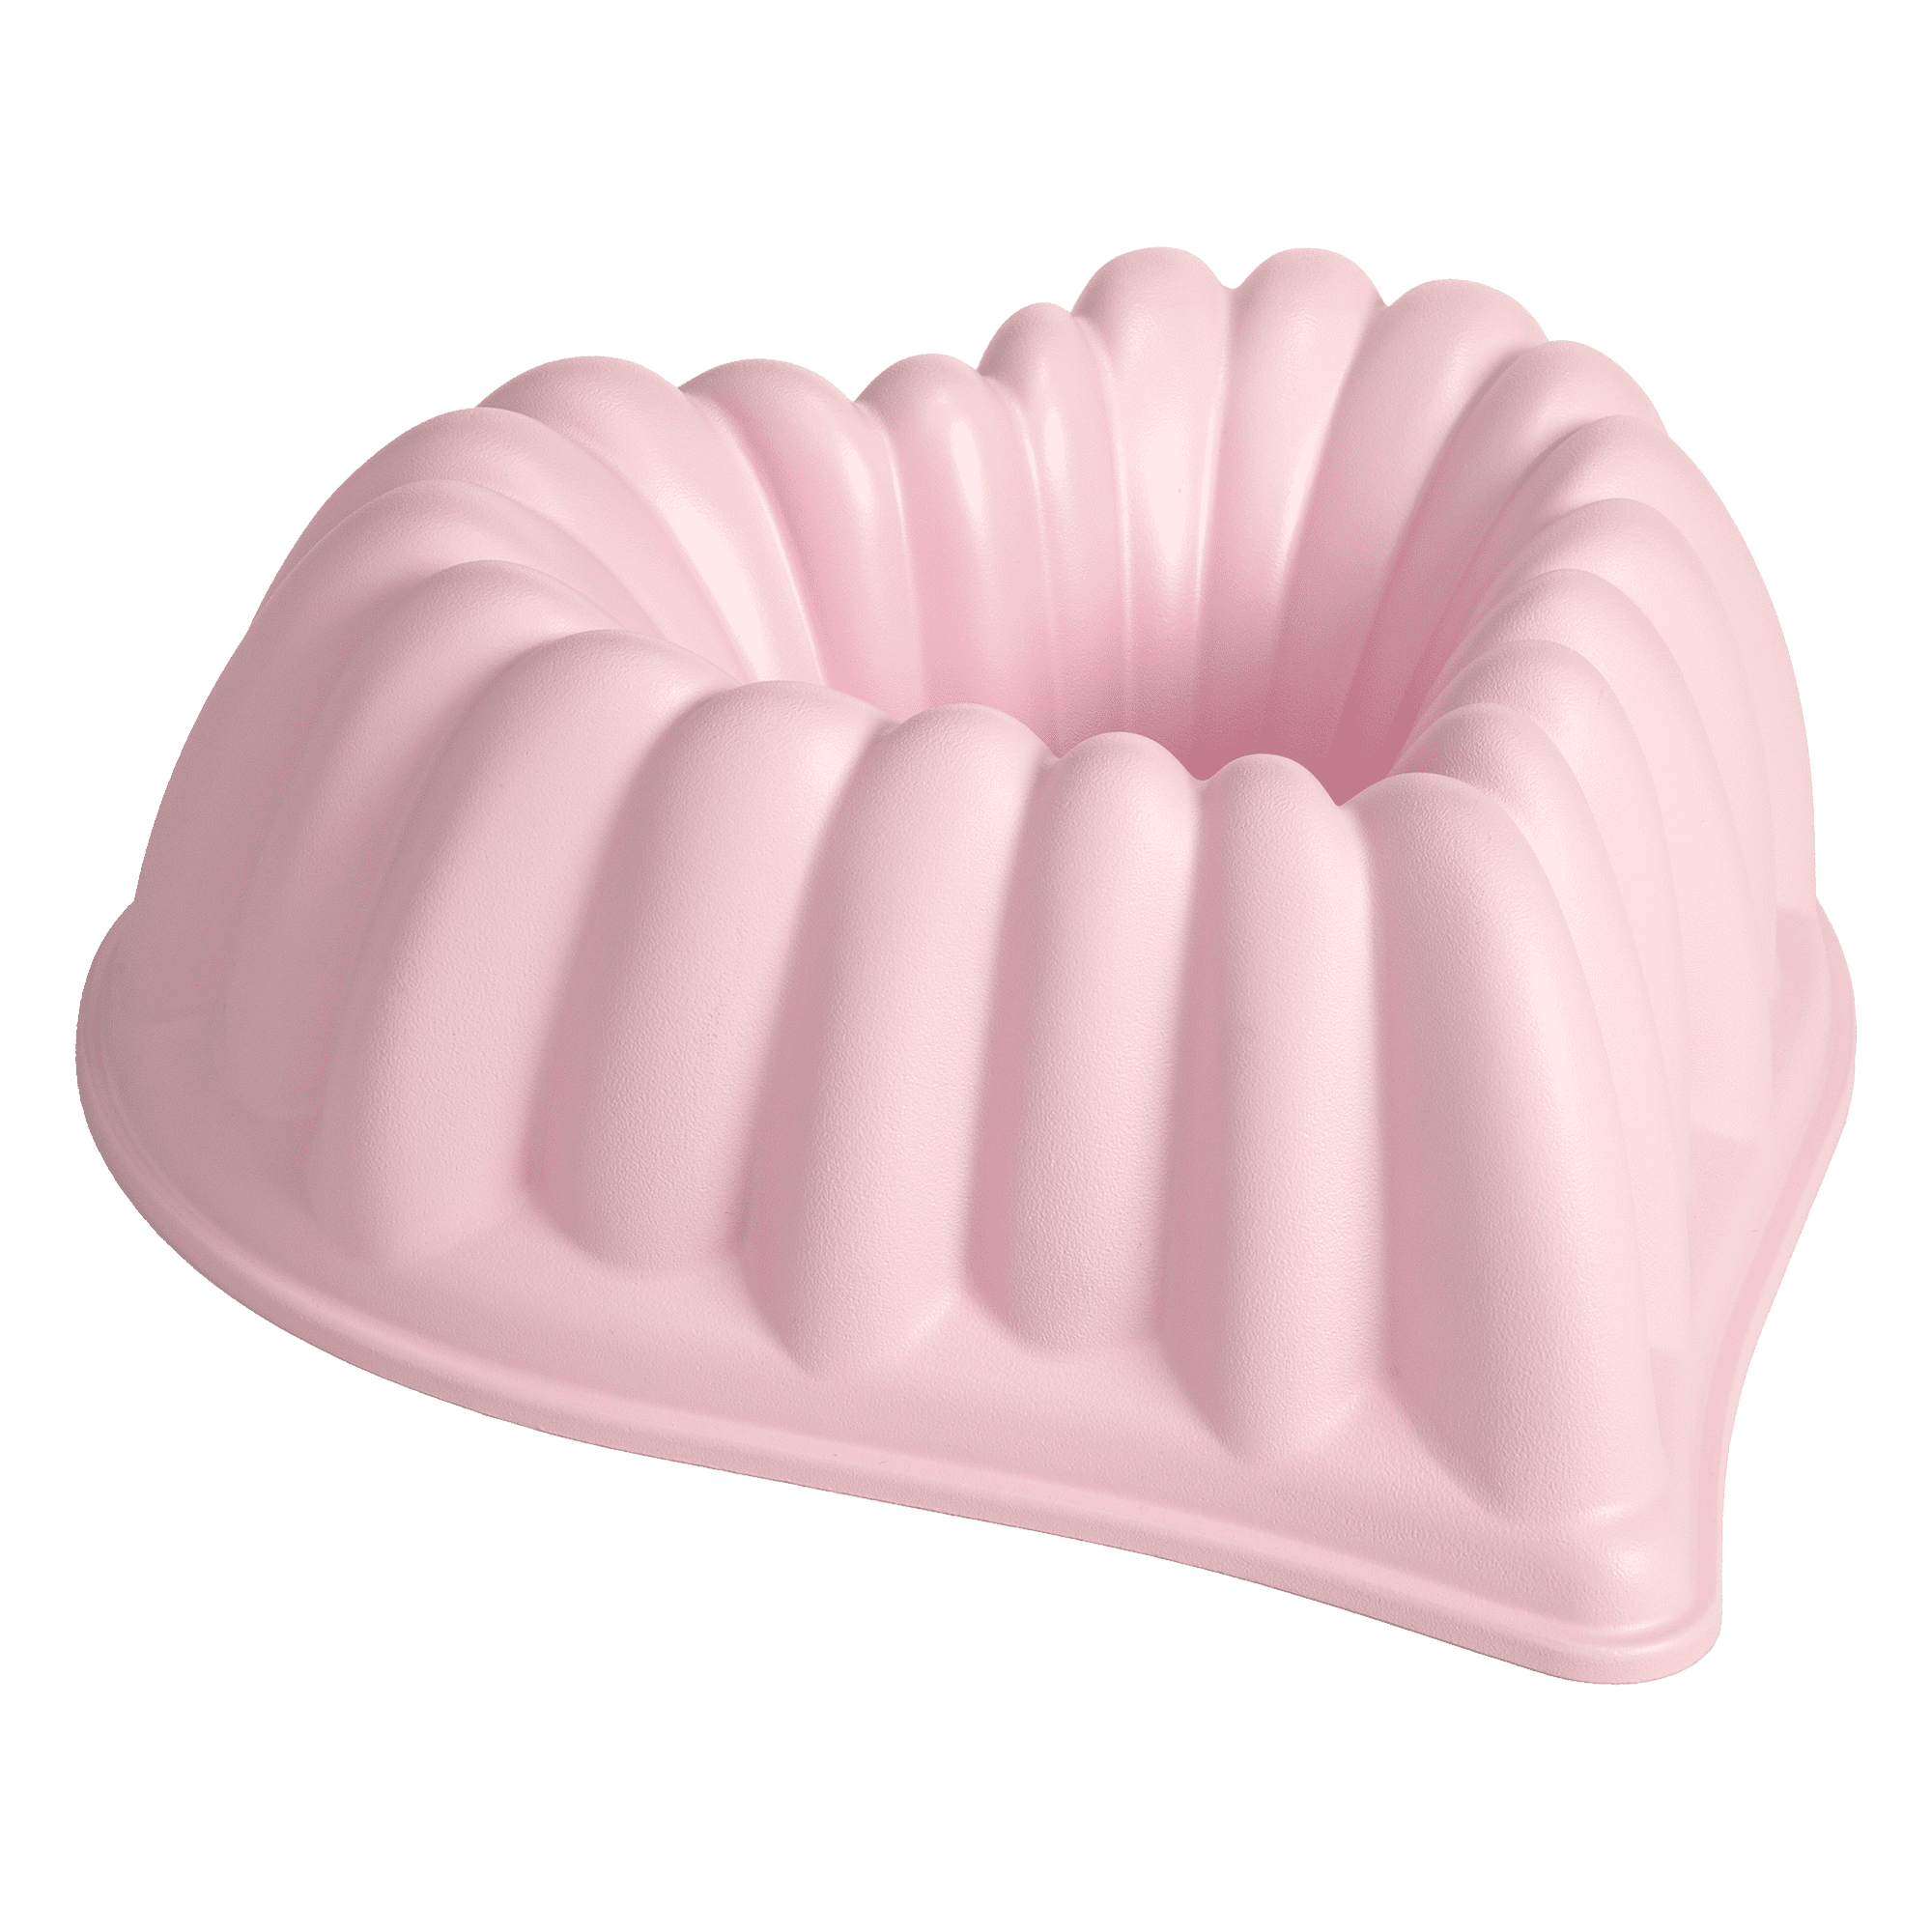  Paris Hilton Heart Shaped Fluted Cake Pan, Cast Aluminum with  Clean Ceramic Nonstick Bakeware, Dishwasher Safe, Made without PFAS, PFOA,  PFOS & PFTE, 9-Inch, Pink: Home & Kitchen